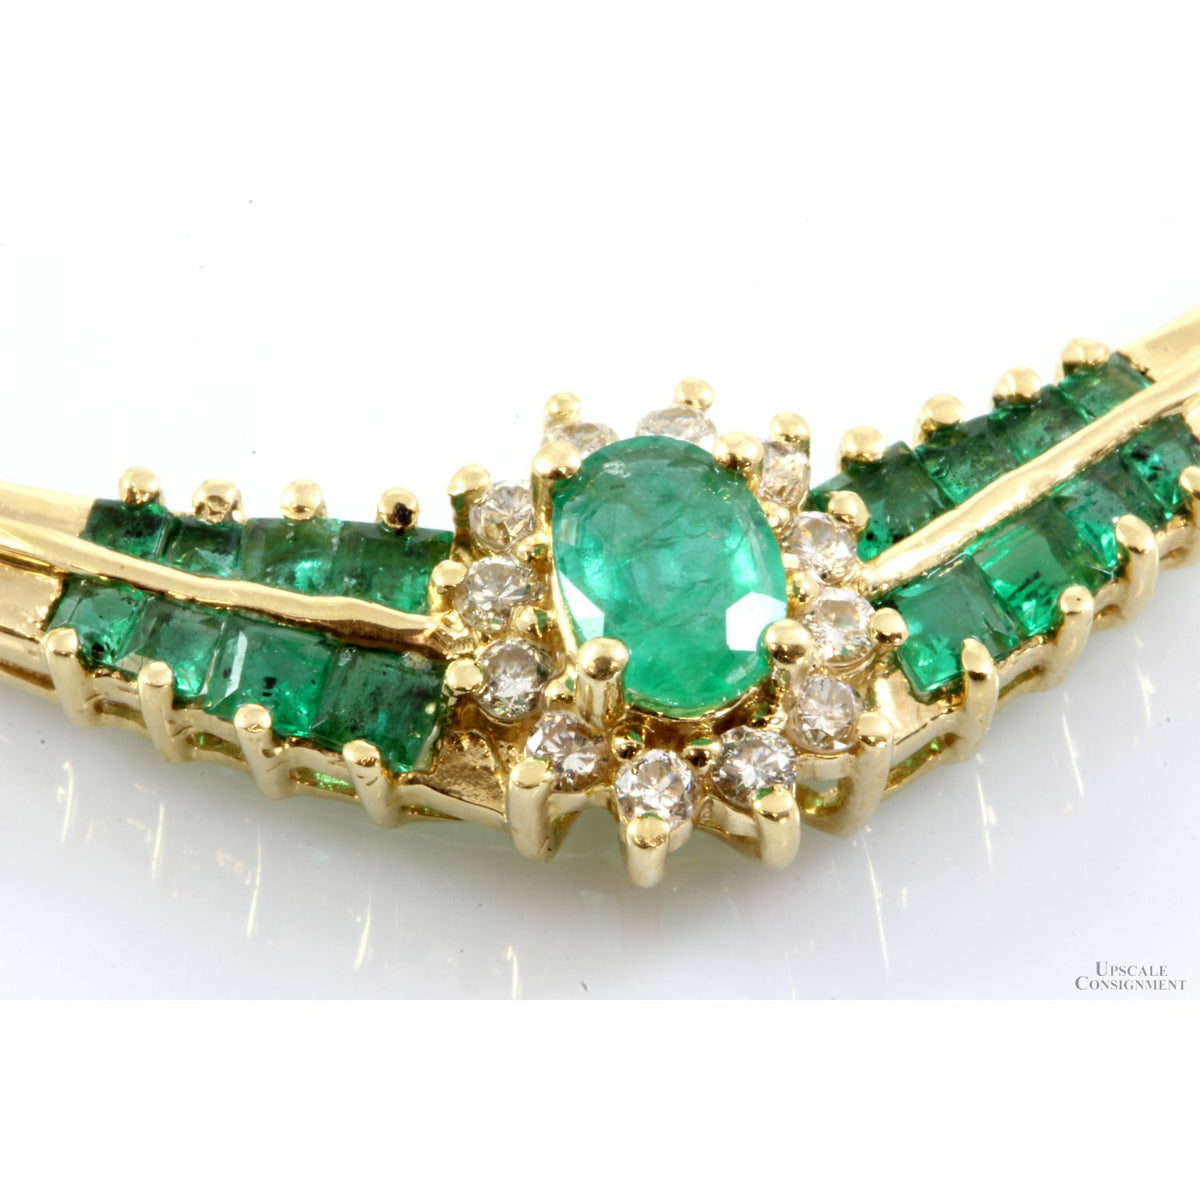 1.53ctw Emerald .32ctwDiamond 14K Gold Formal Necklace